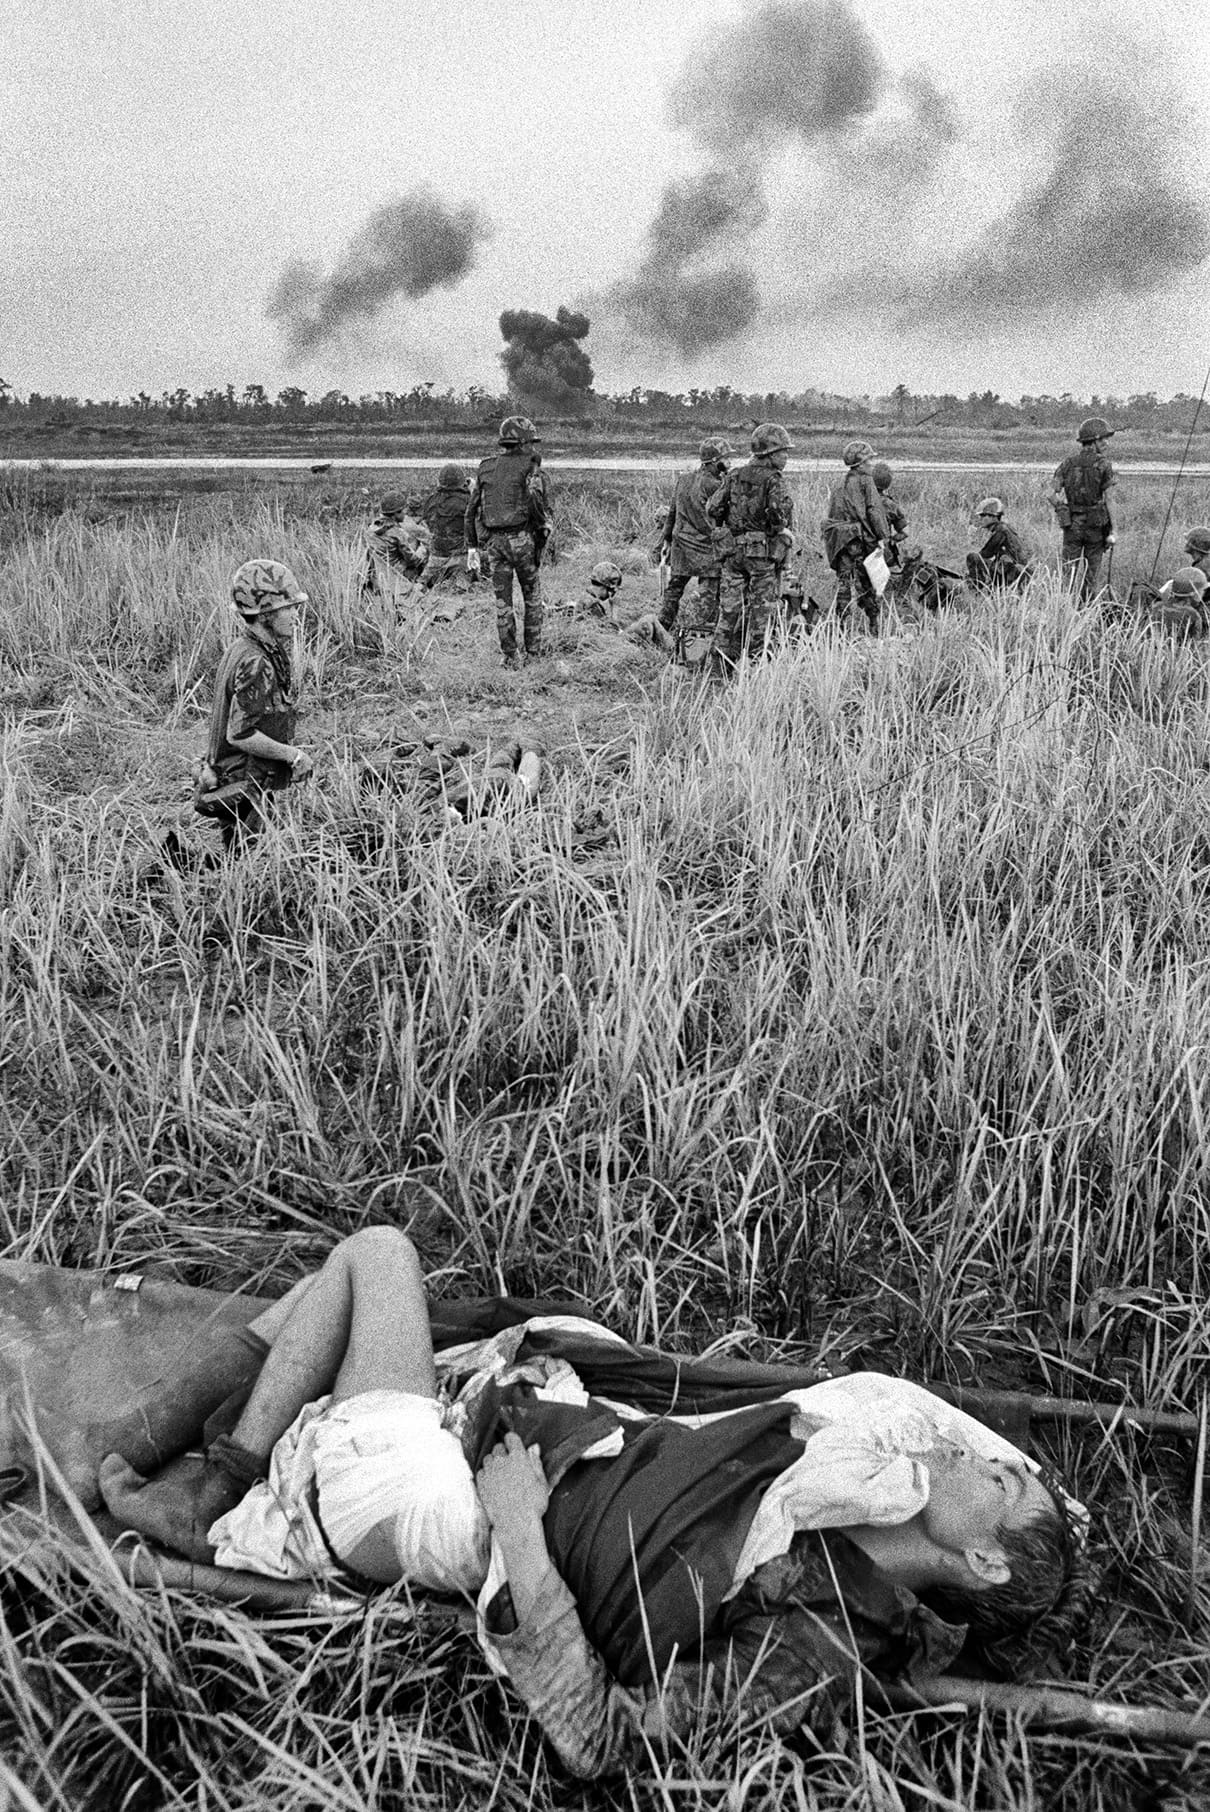 A gravely wounded South Vietnamese soldier during the battle